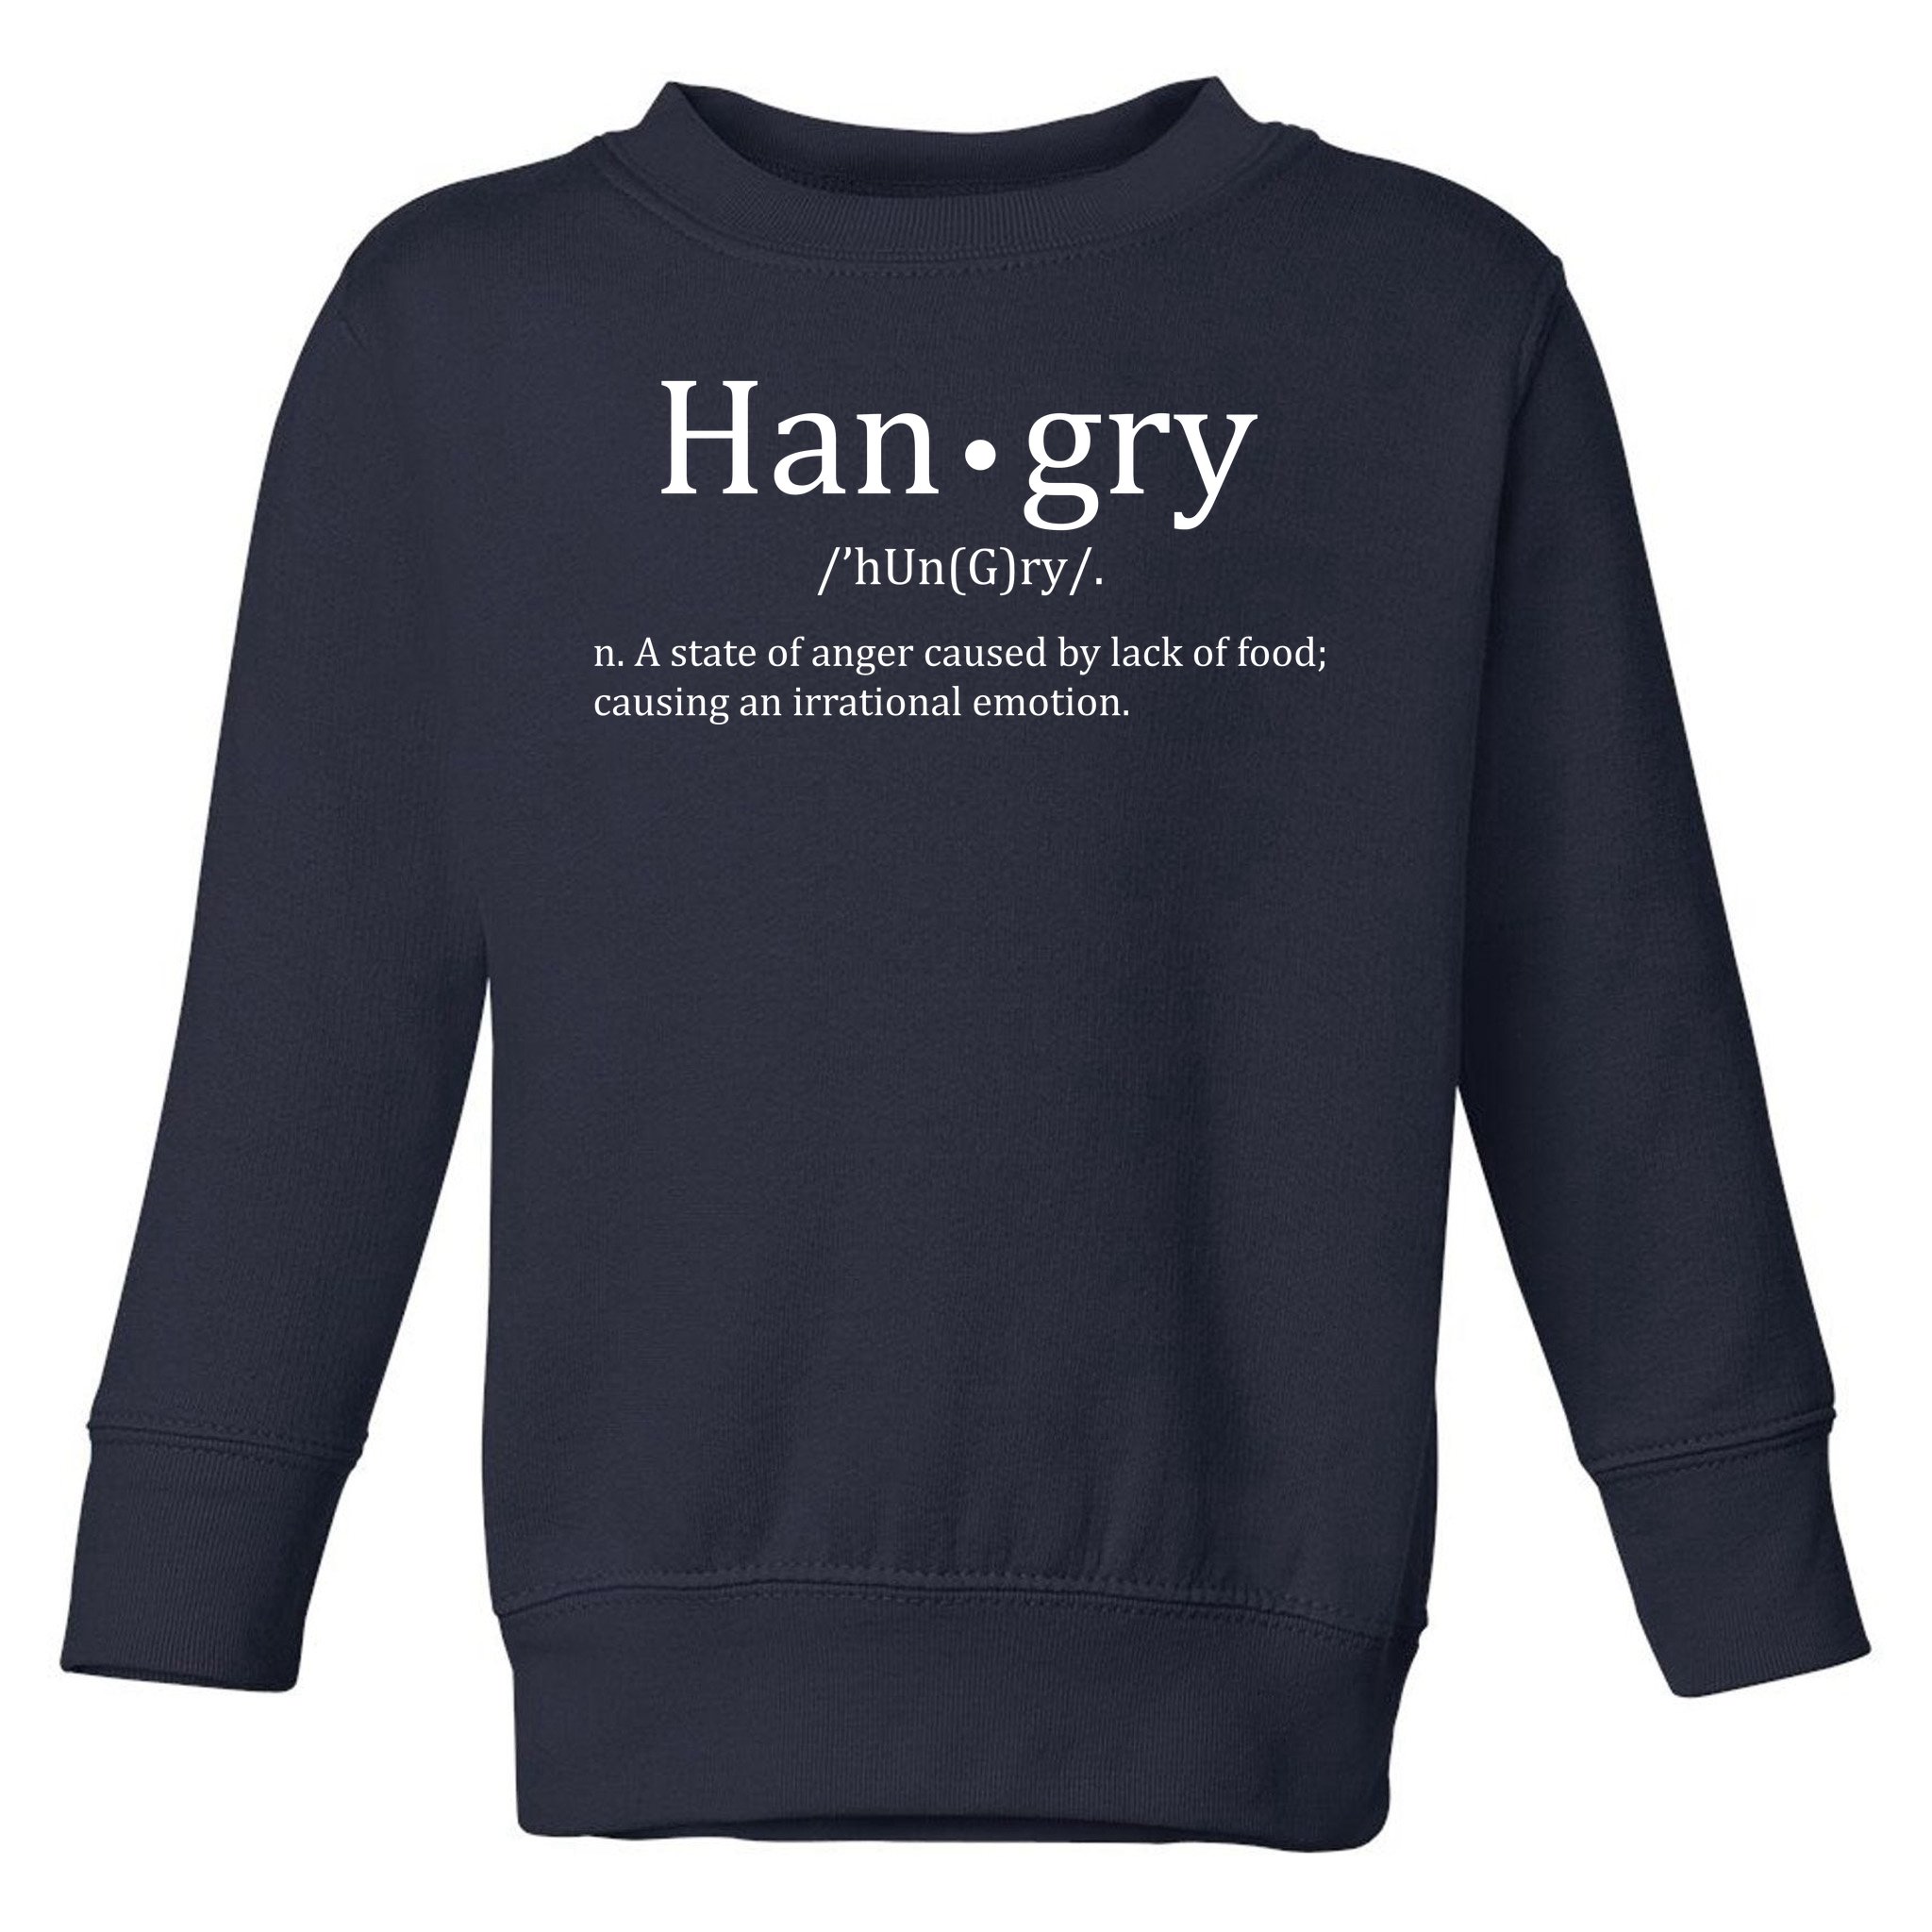 Hangry Sweatshirt Funny Hungry han.gry Angry Description Jumper Top Xmas Gift 